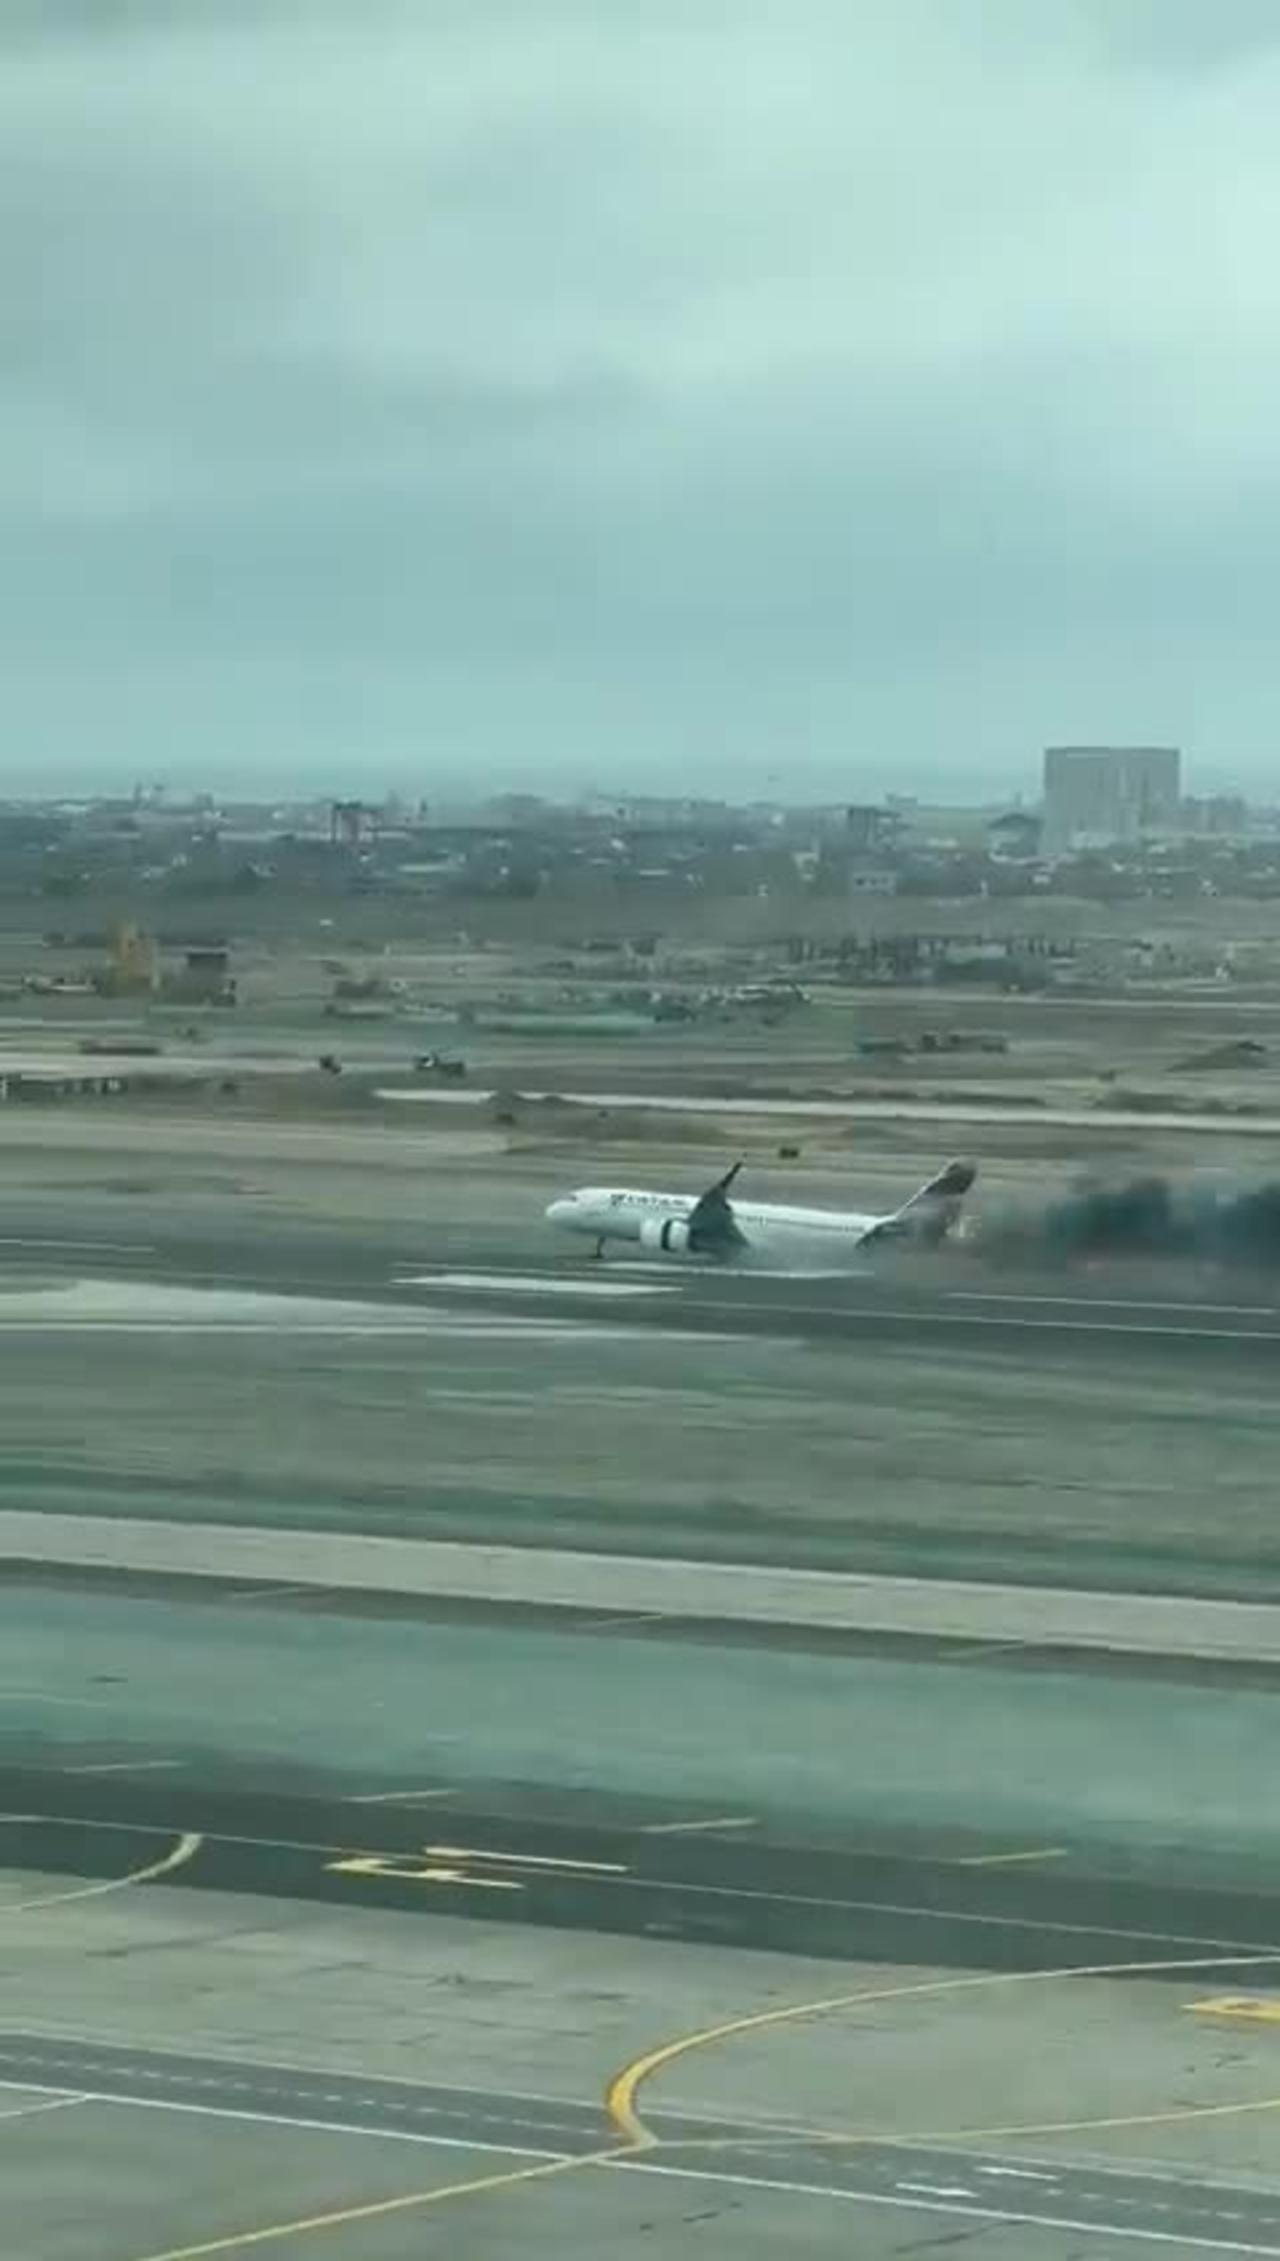 Watch How This Plane is Terrifyingly Skiding Down The Runway at Lima Airporto